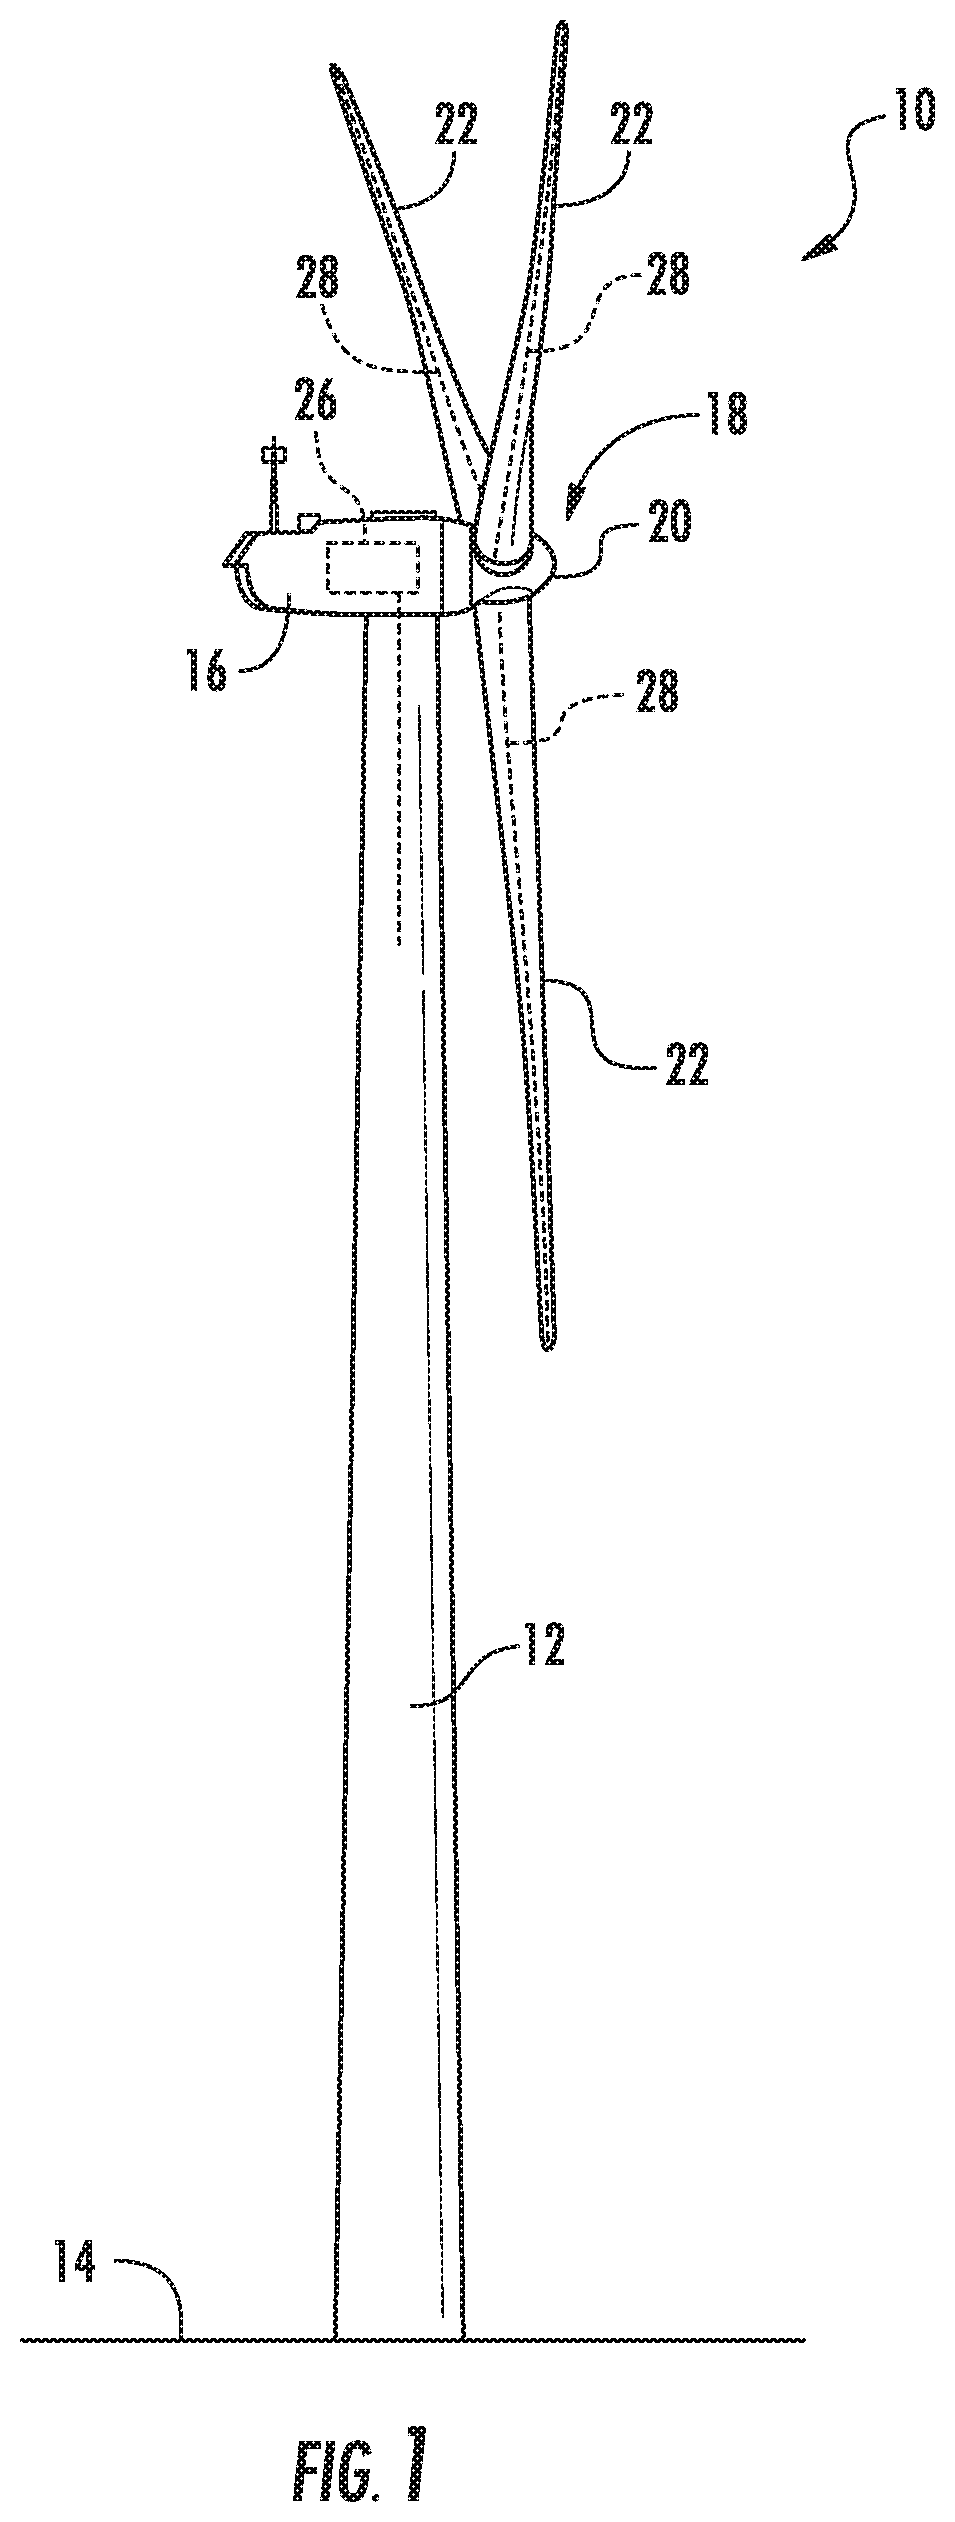 System and Method for Controlling Thrust and/or Tower Loads of a Wind Turbine